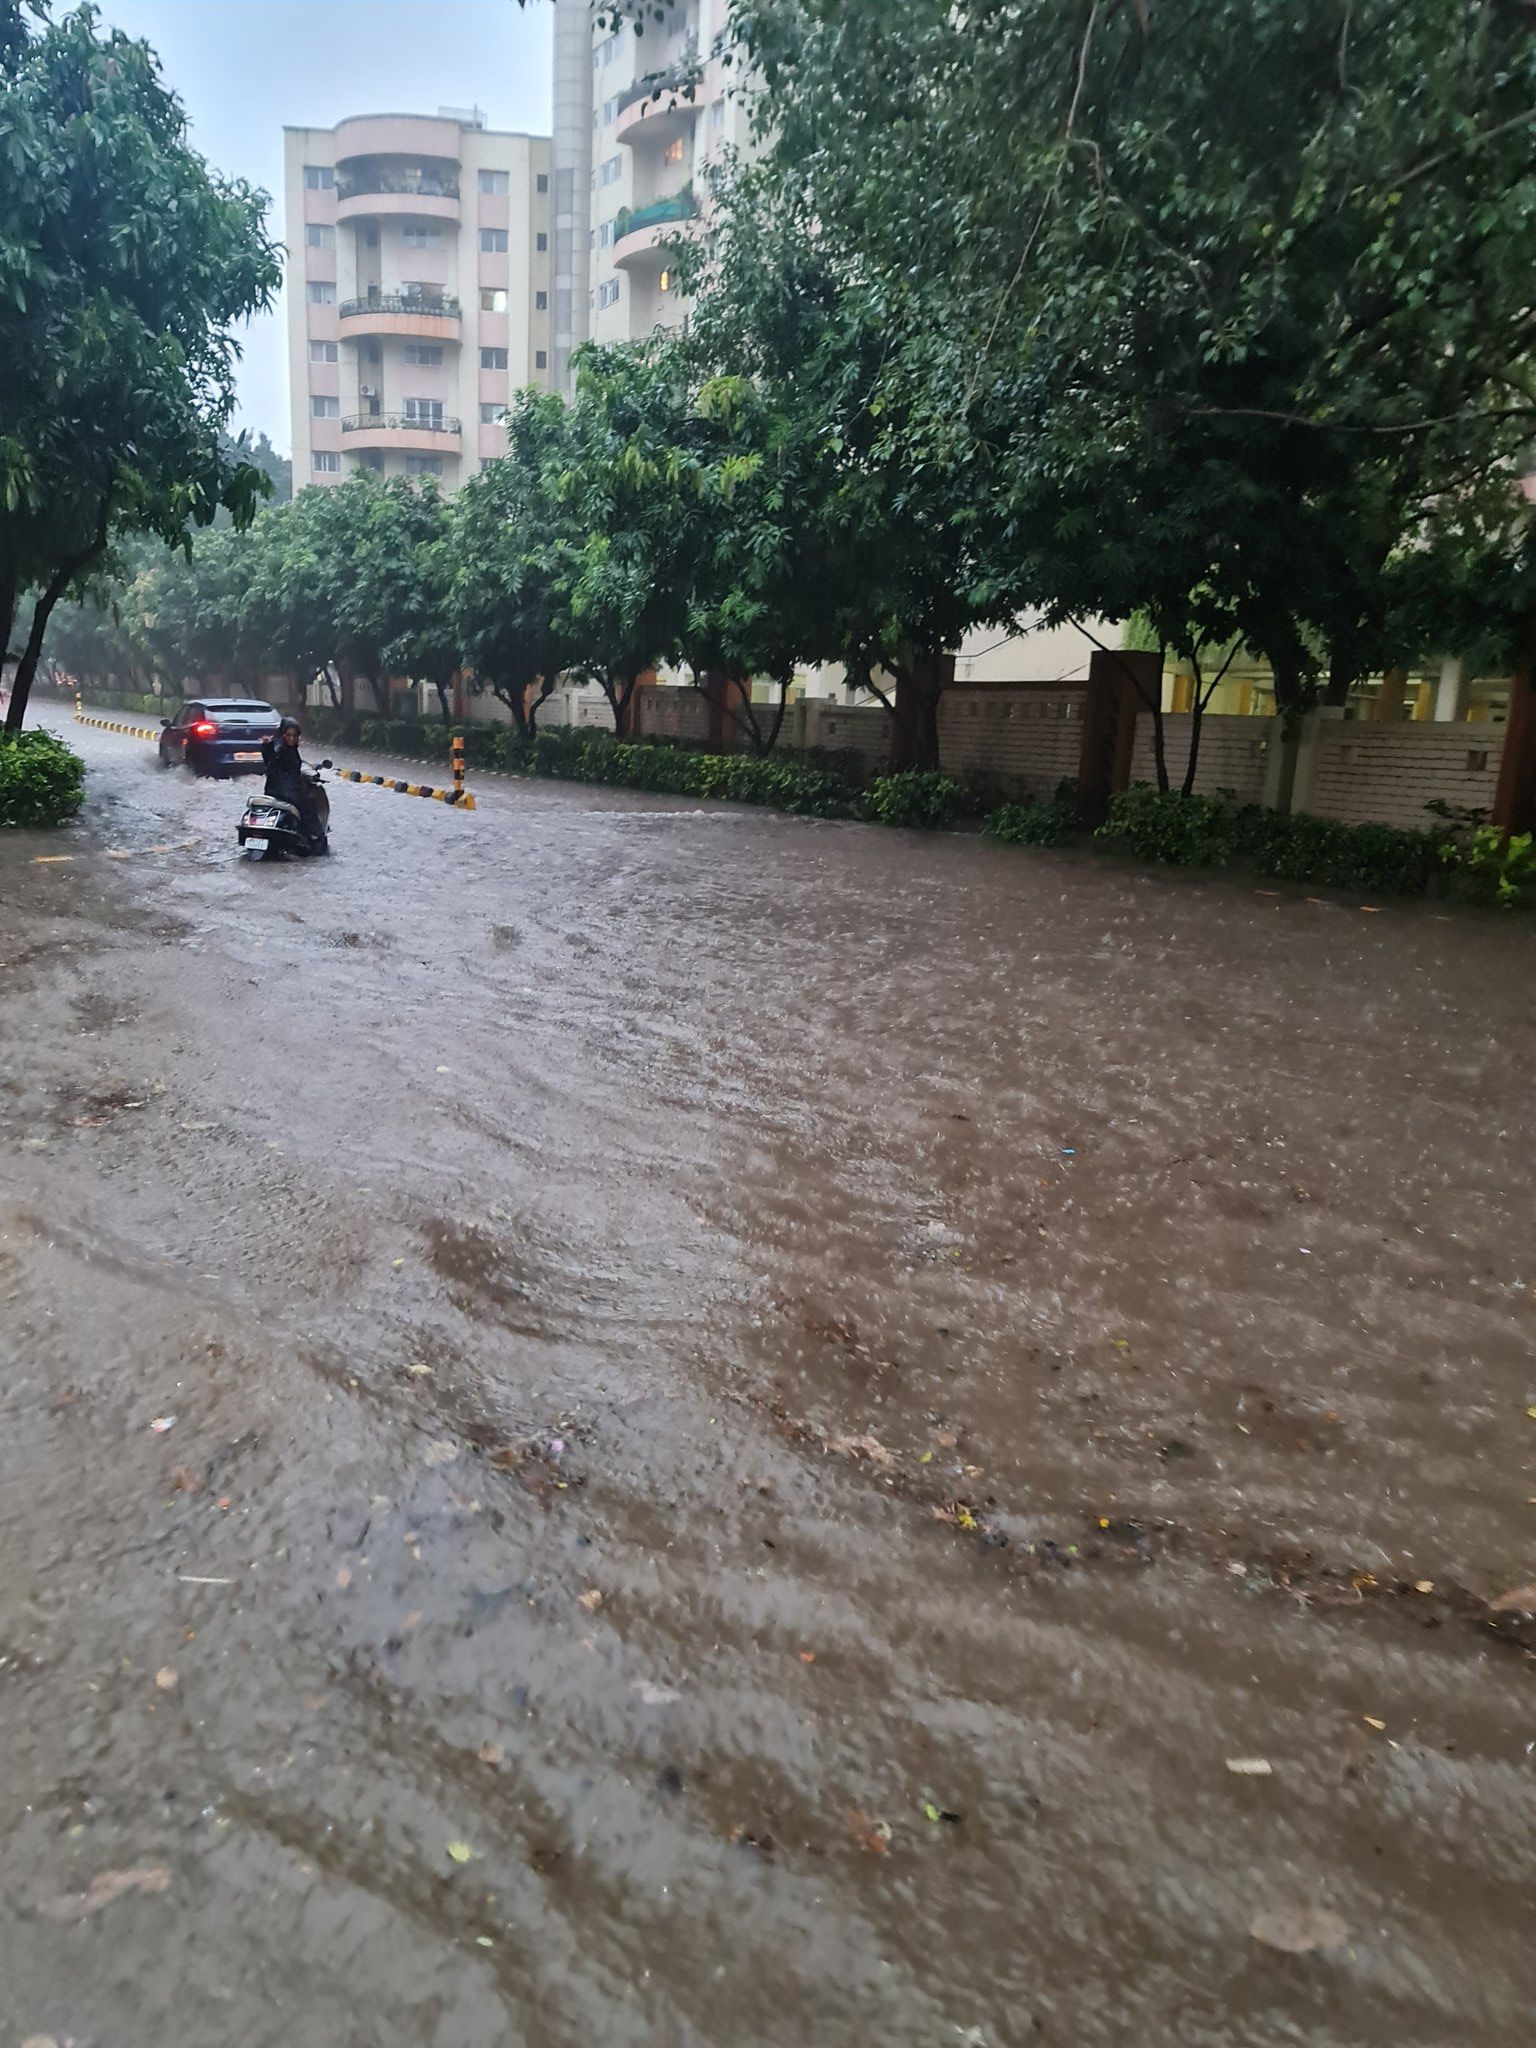 Watch: Pune sees flooding, traffic jams after excessive rainfall